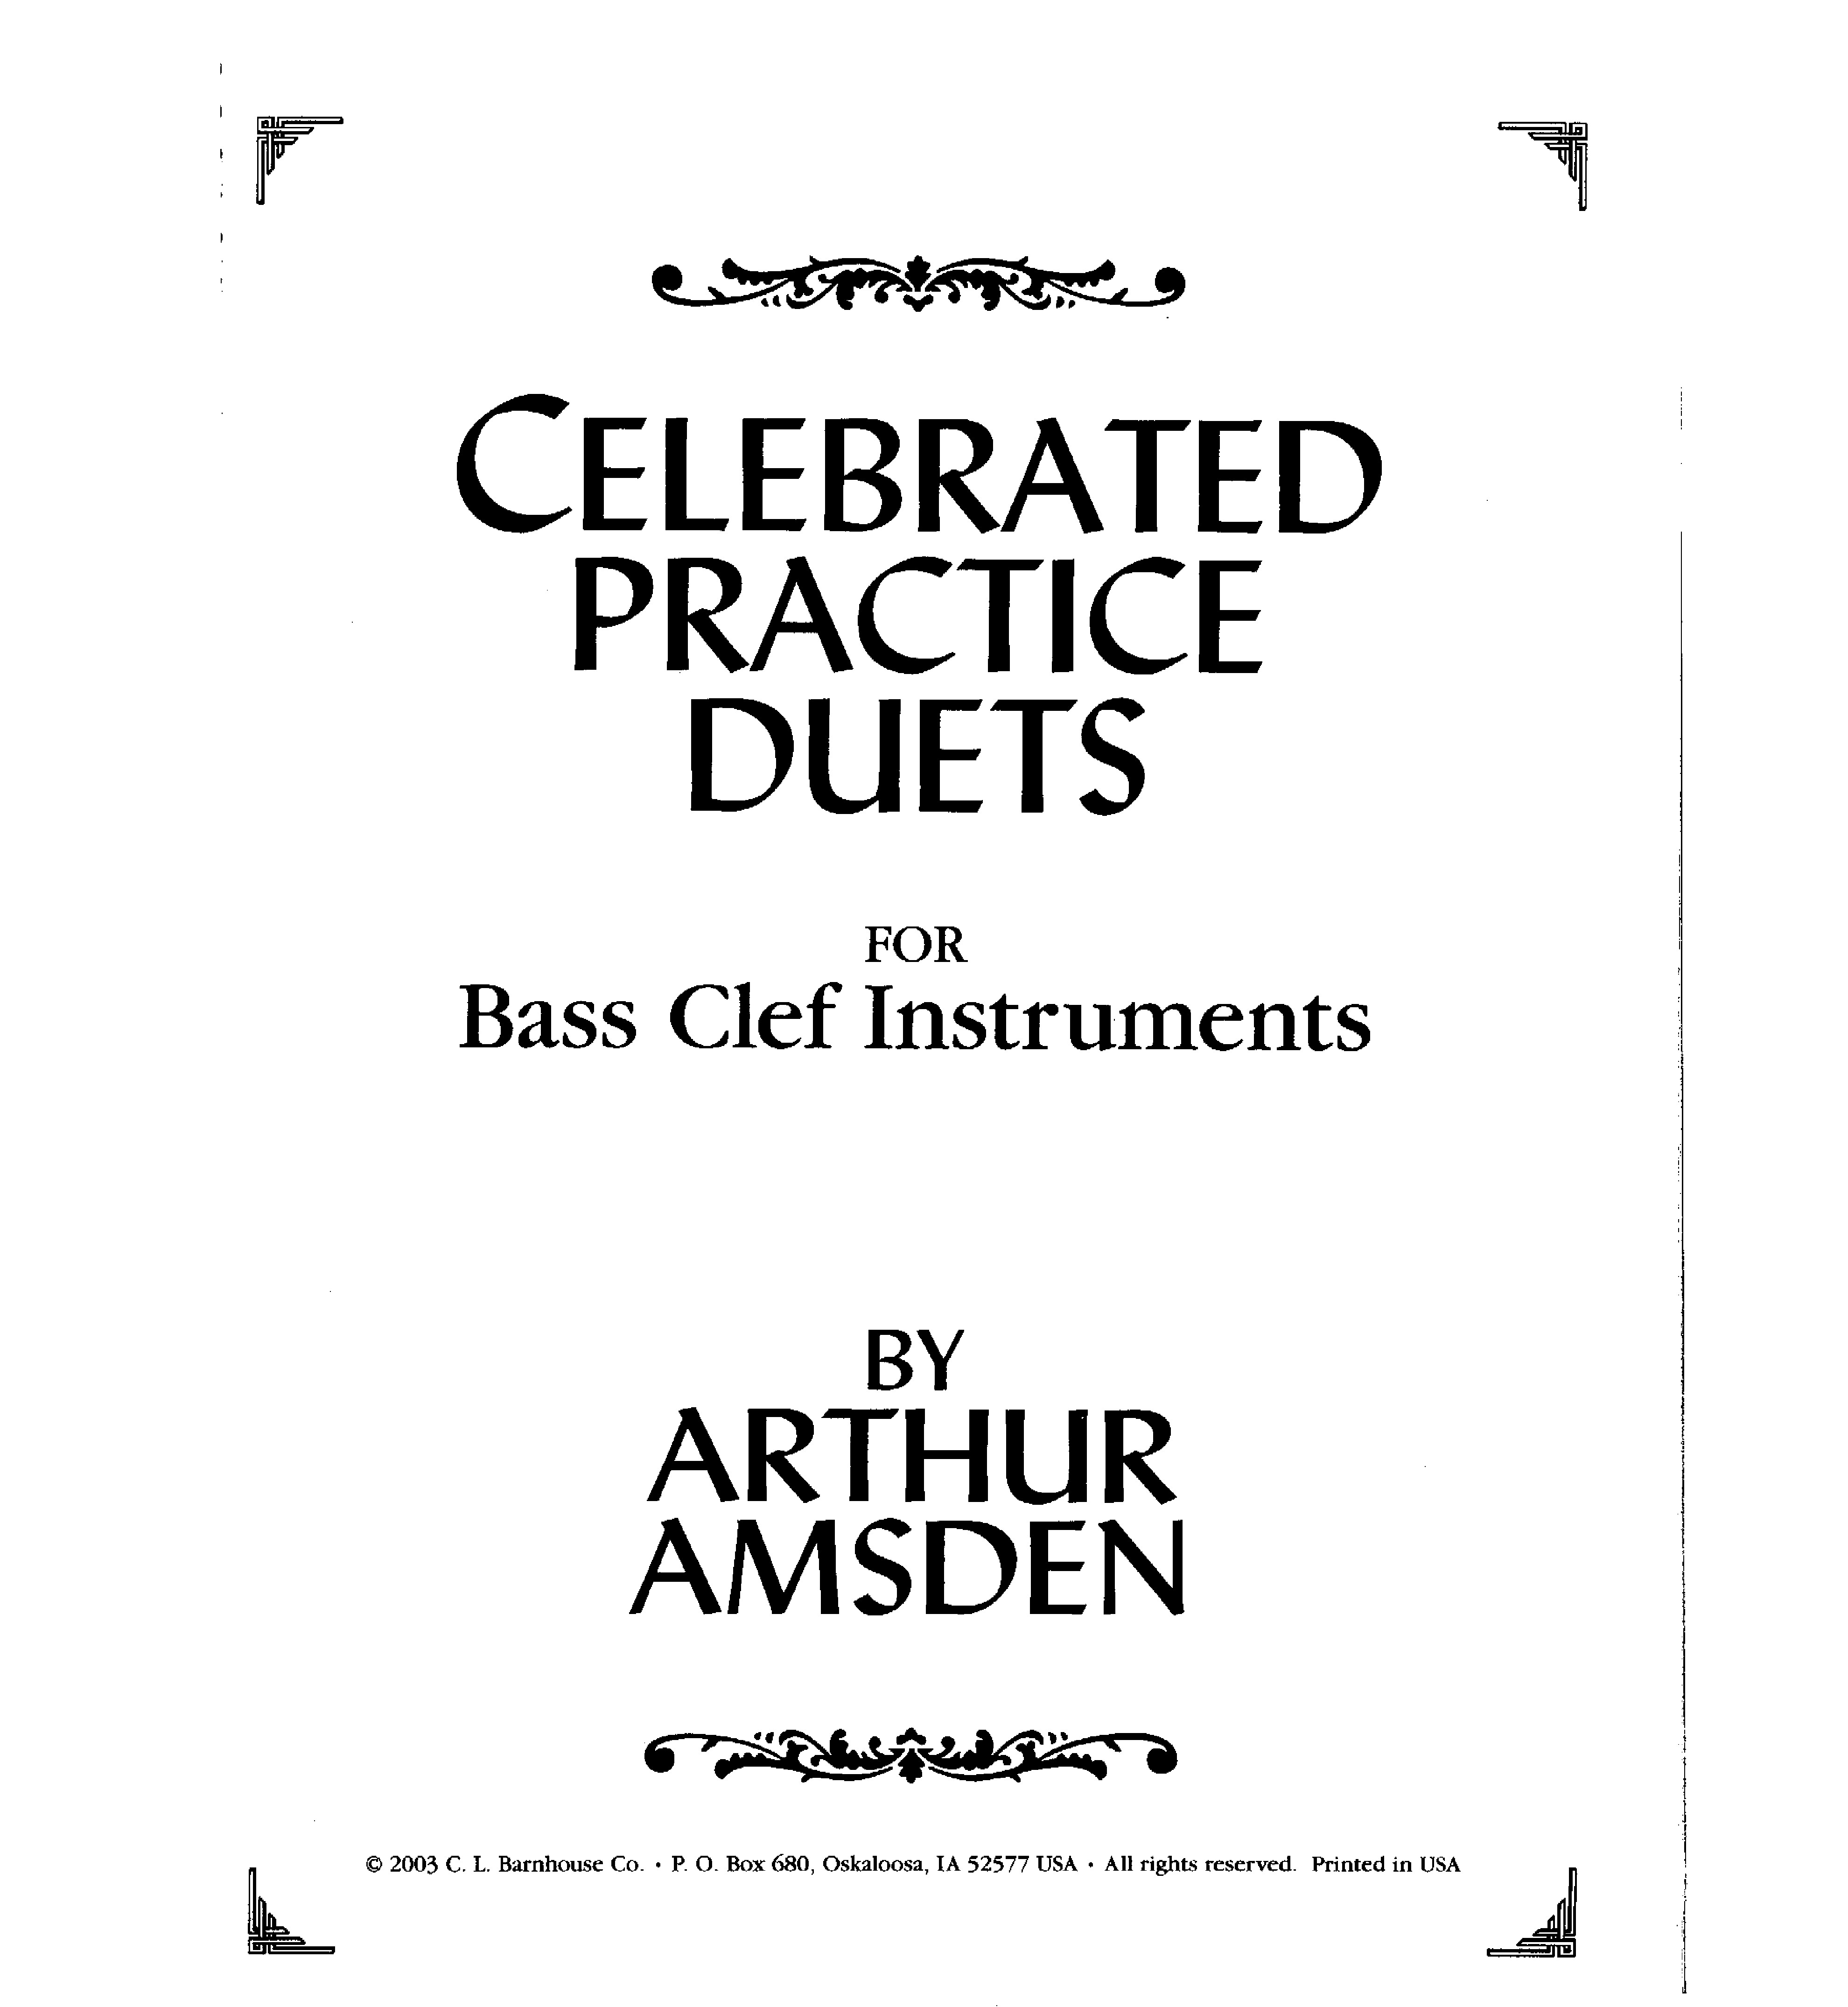 CELEBRATED PRACTICE DUETS BASS CLEF